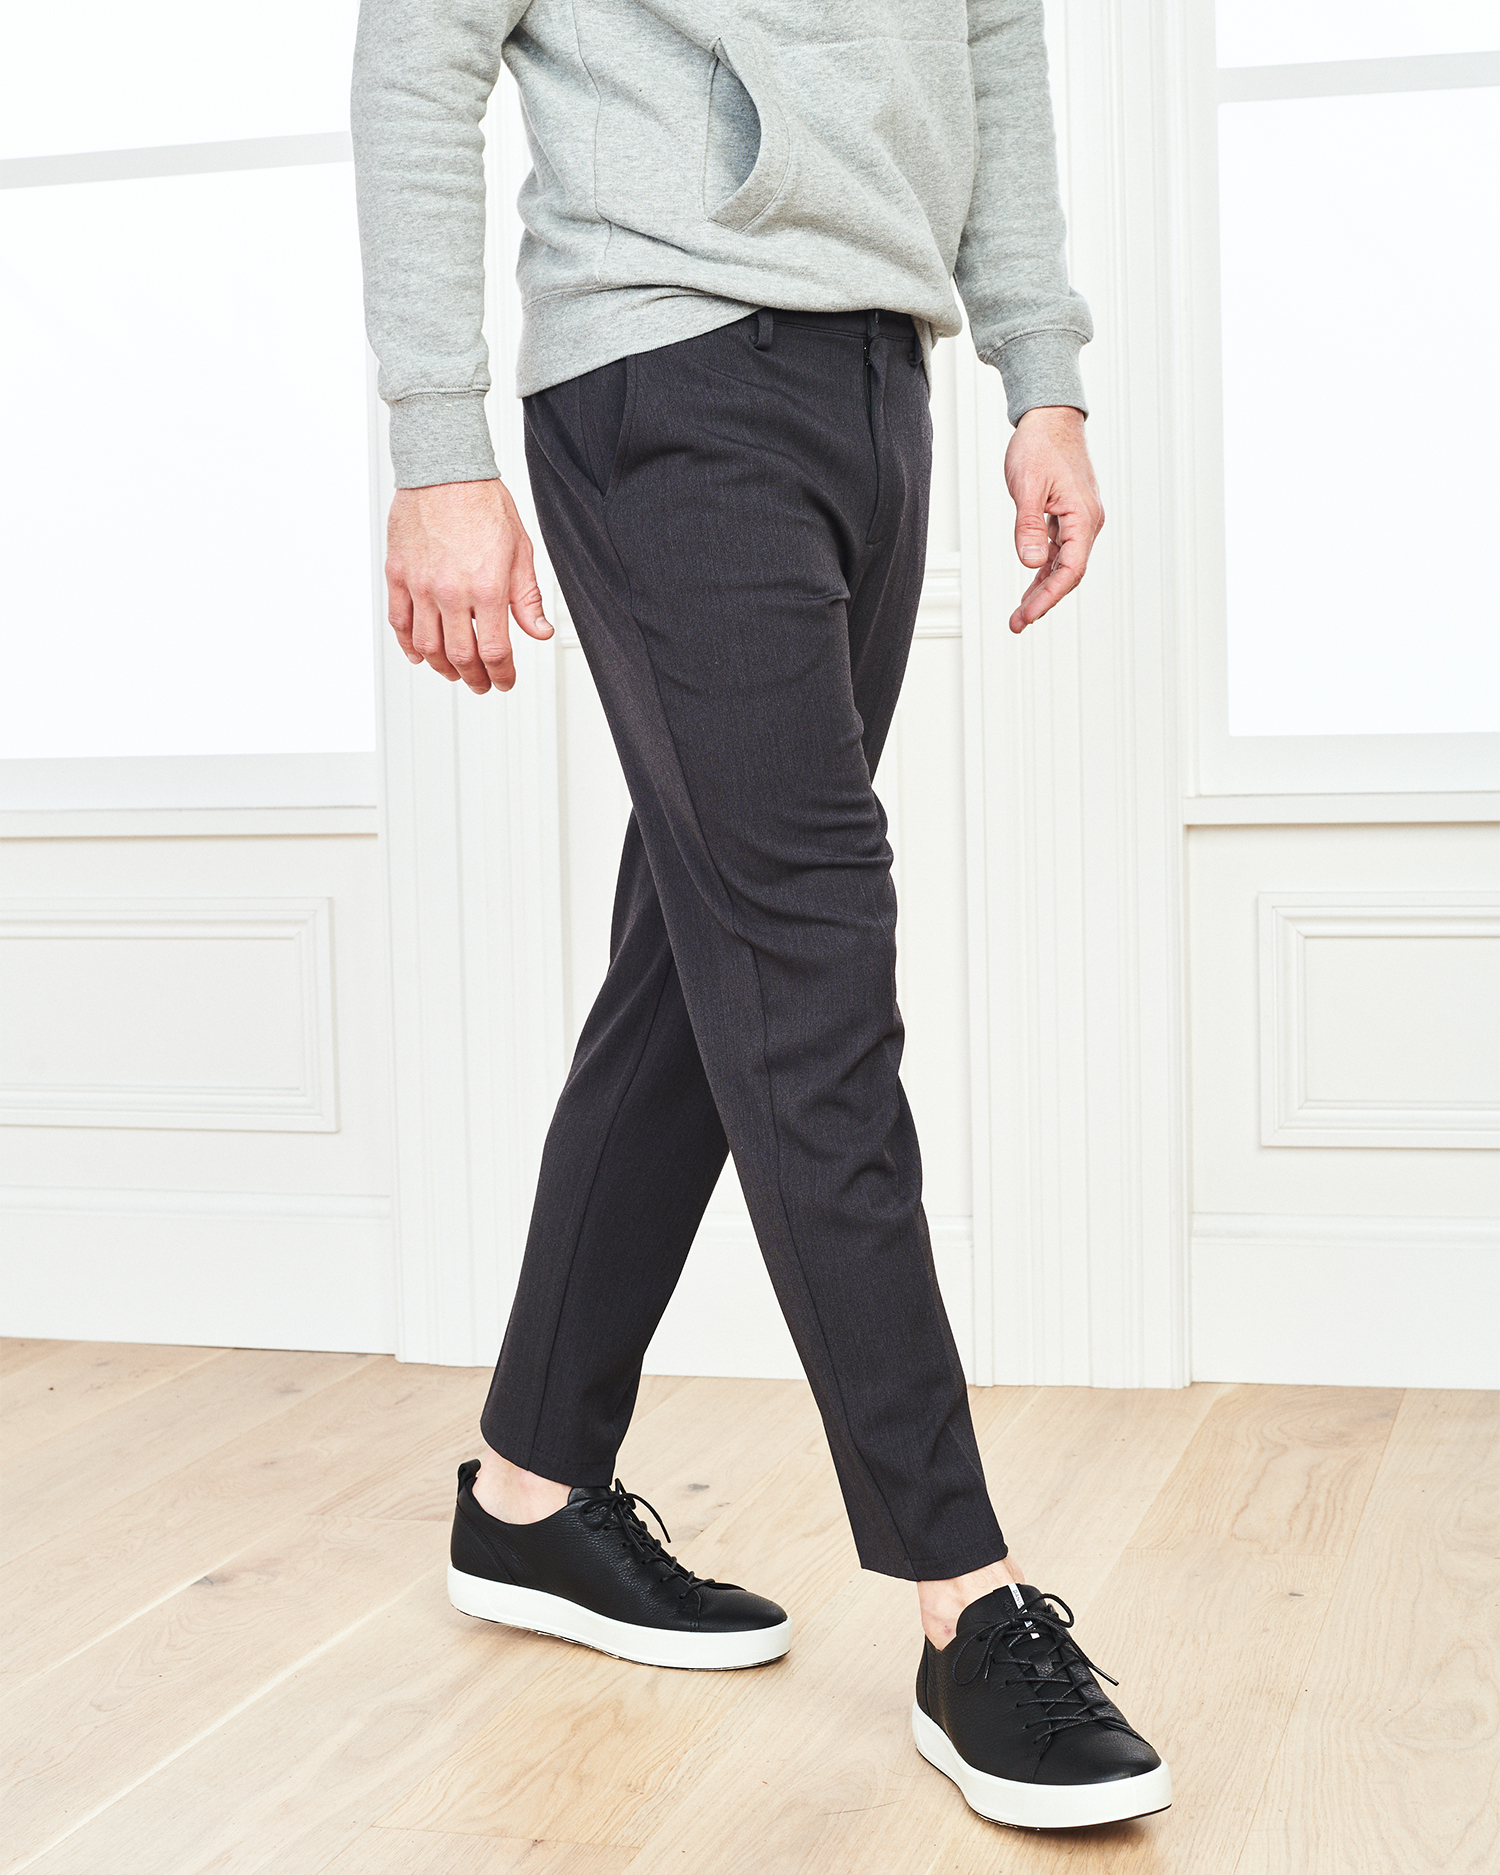 Quince Men's Performance Lounge/work Pants In Dark Charcoal